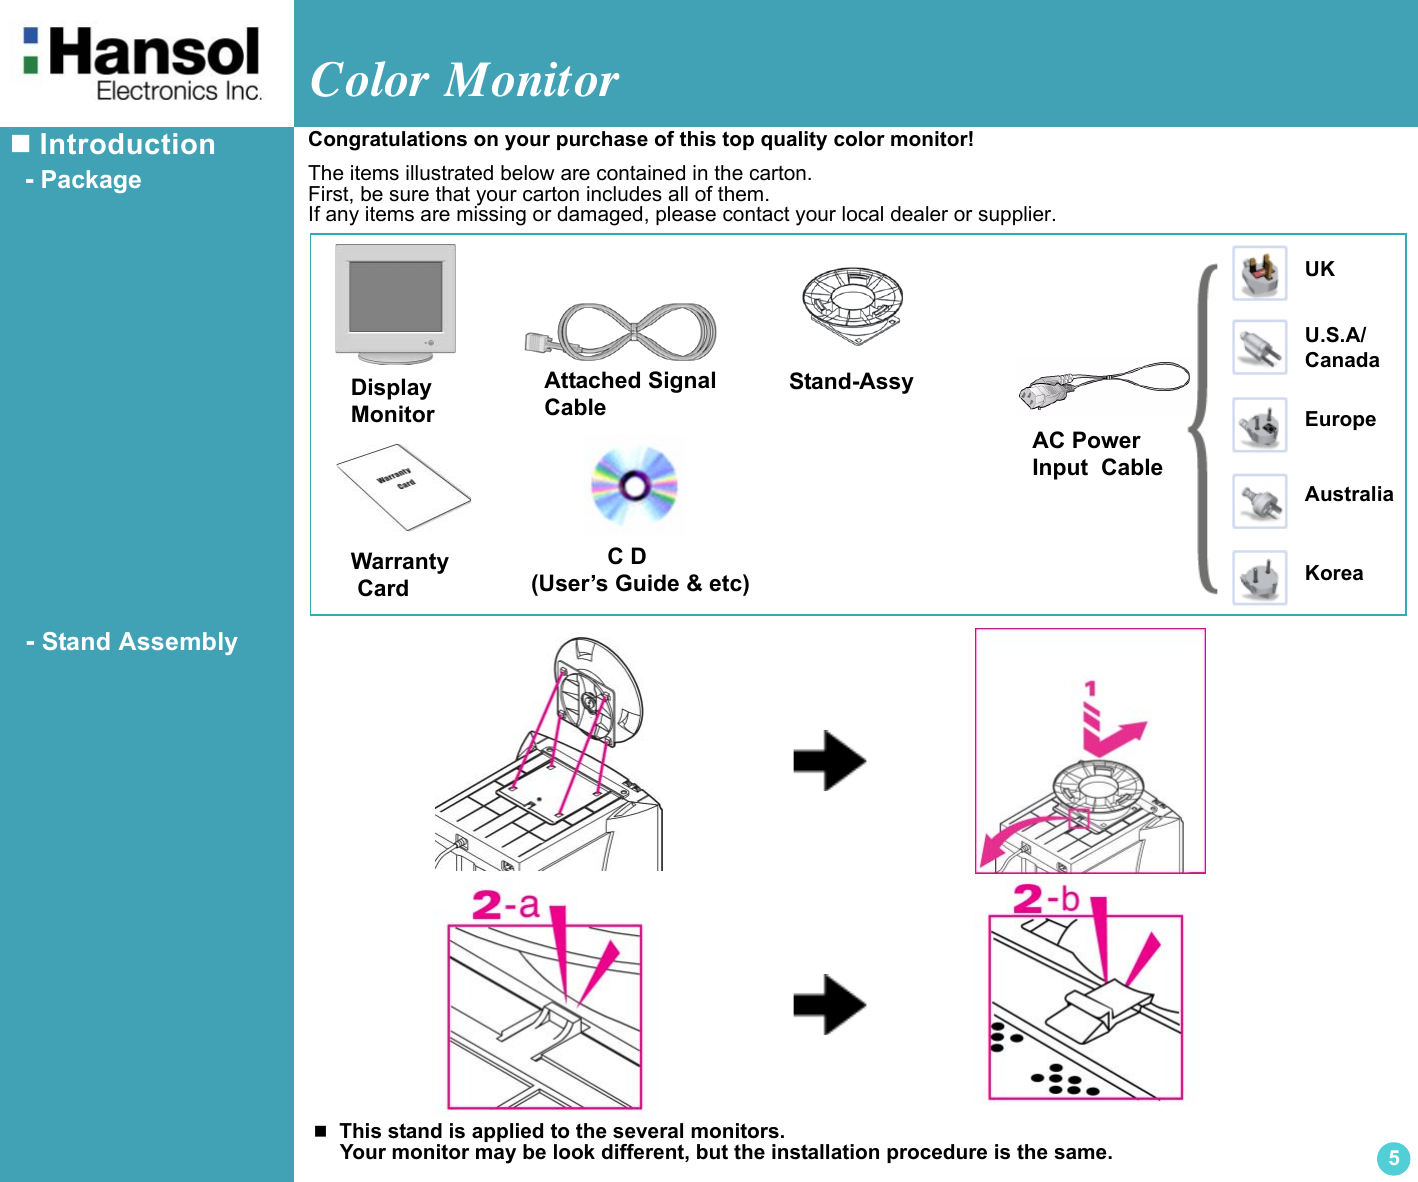 Color Monitor5 Introduction  - Package  - Stand AssemblyDisplayMonitorUKU.S.A/CanadaEuropeAustraliaKoreaAC Power Input  CableAttached SignalCable            C D(User’s Guide &amp; etc)Stand-AssyWarranty Card  This stand is applied to the several monitors.    Your monitor may be look different, but the installation procedure is the same.Congratulations on your purchase of this top quality color monitor!The items illustrated below are contained in the carton.First, be sure that your carton includes all of them.If any items are missing or damaged, please contact your local dealer or supplier.